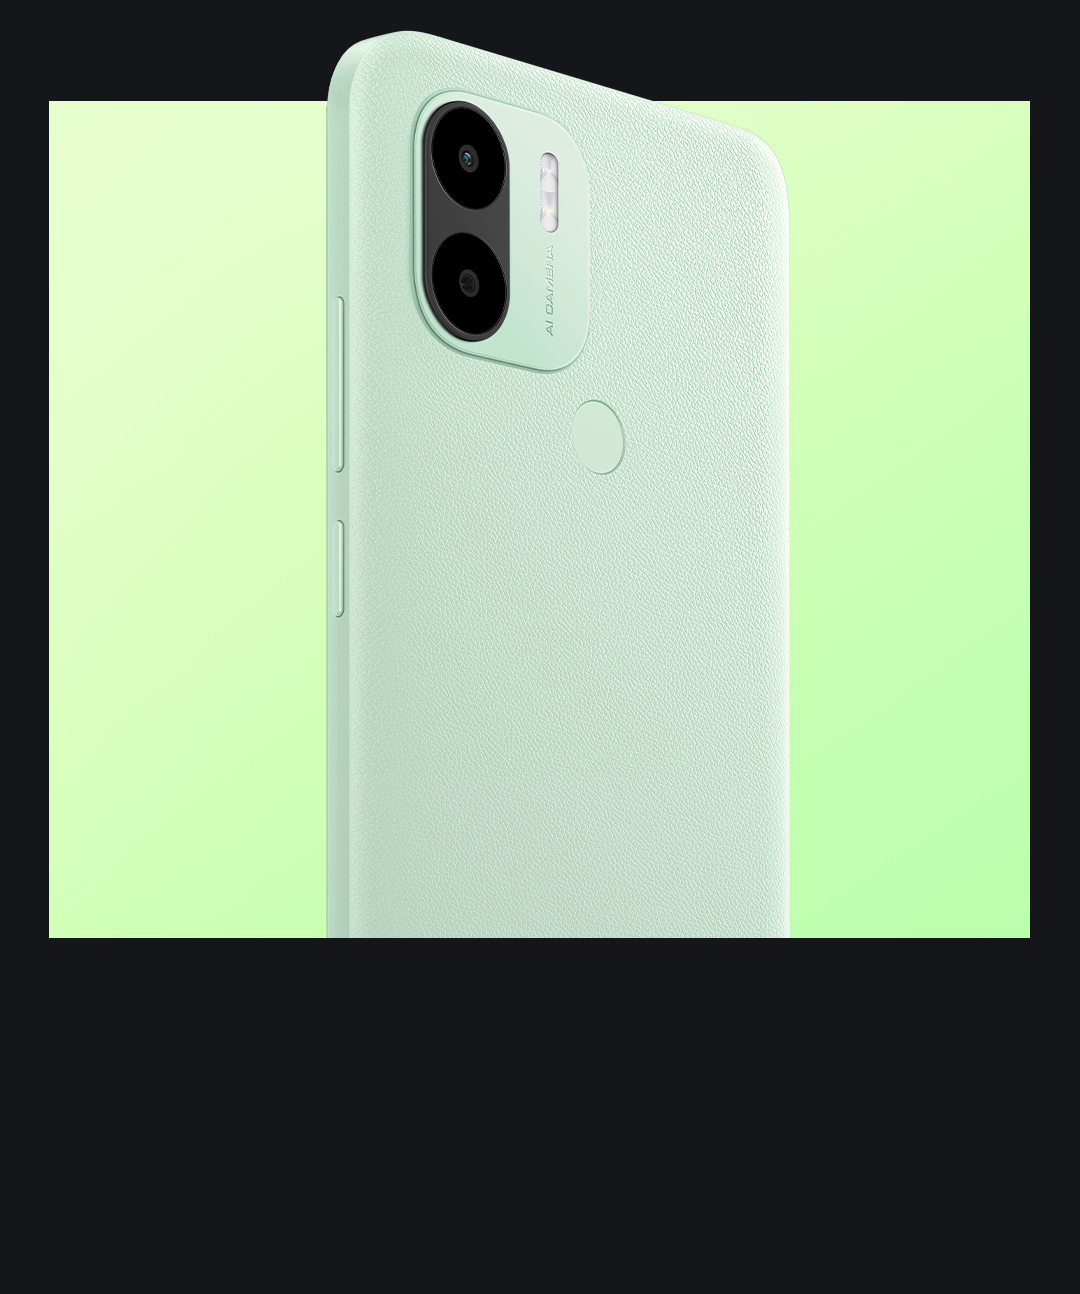 Xiaomi Redmi A2 Plus Images, Official Pictures, Photo Gallery